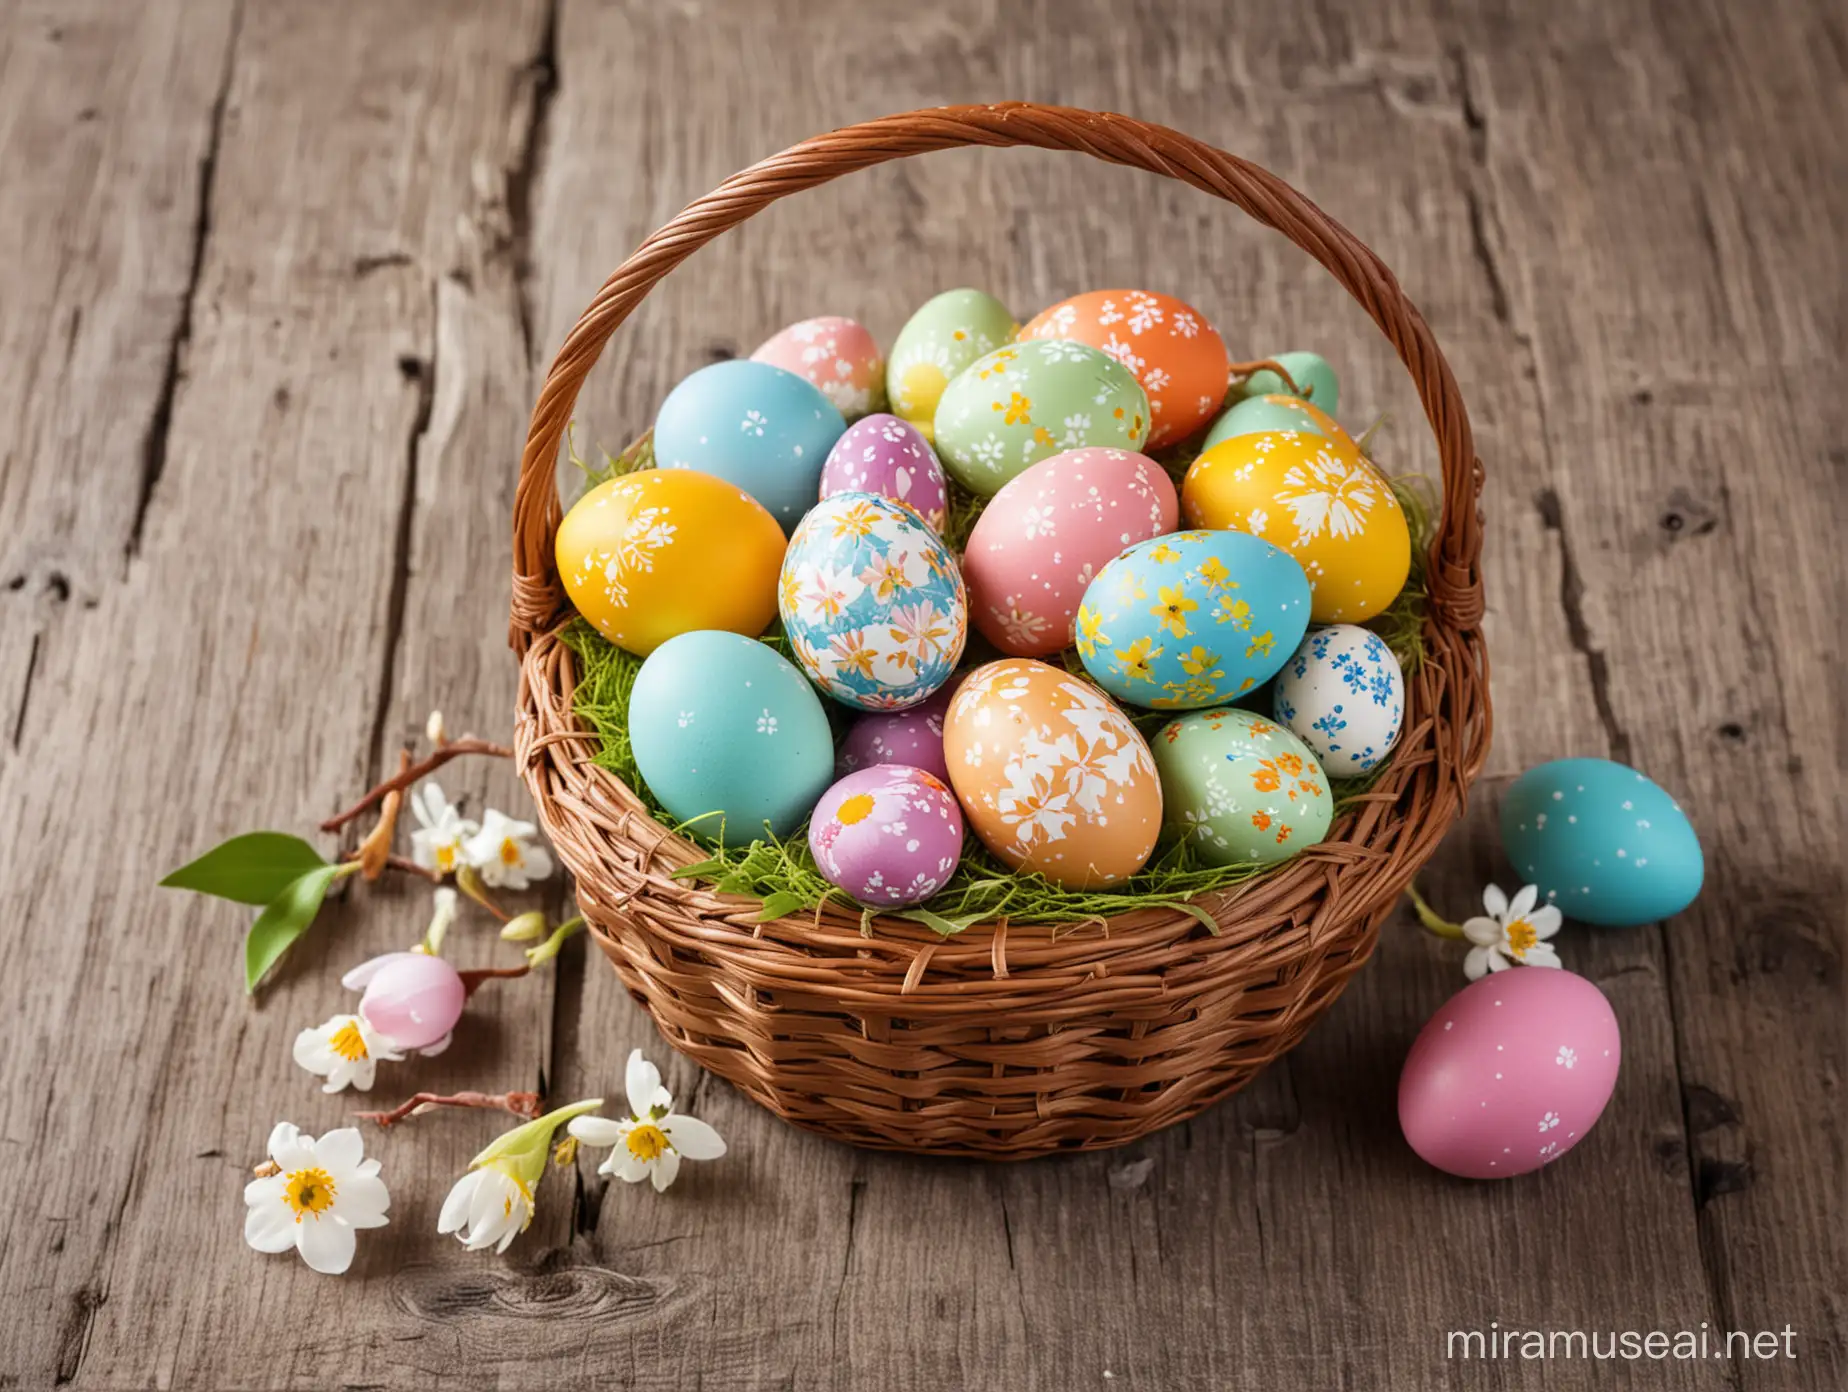 Springtime Family Fun with Colorful Easter Eggs